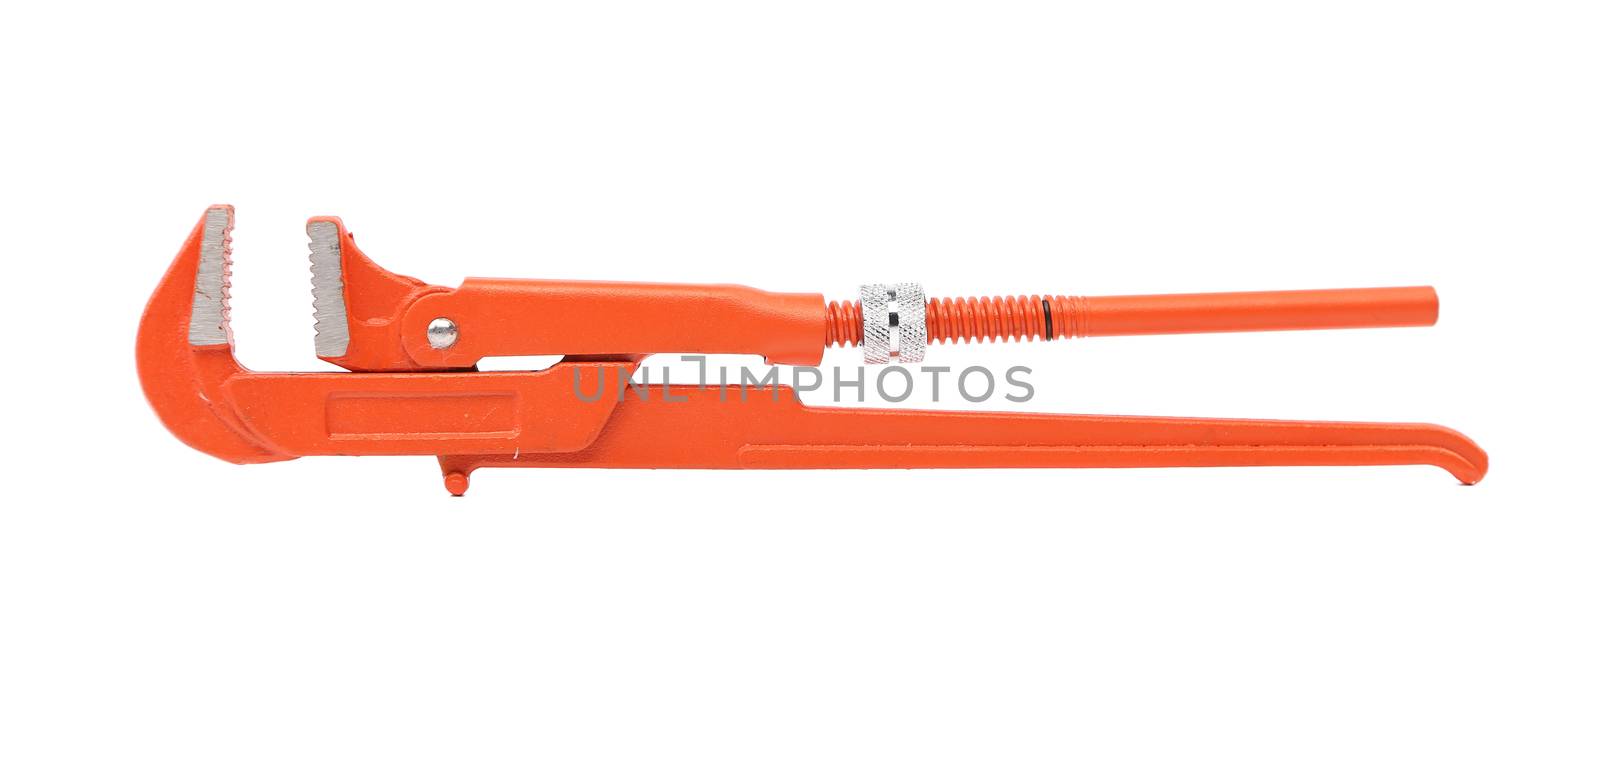 Red pipe wrench by indigolotos